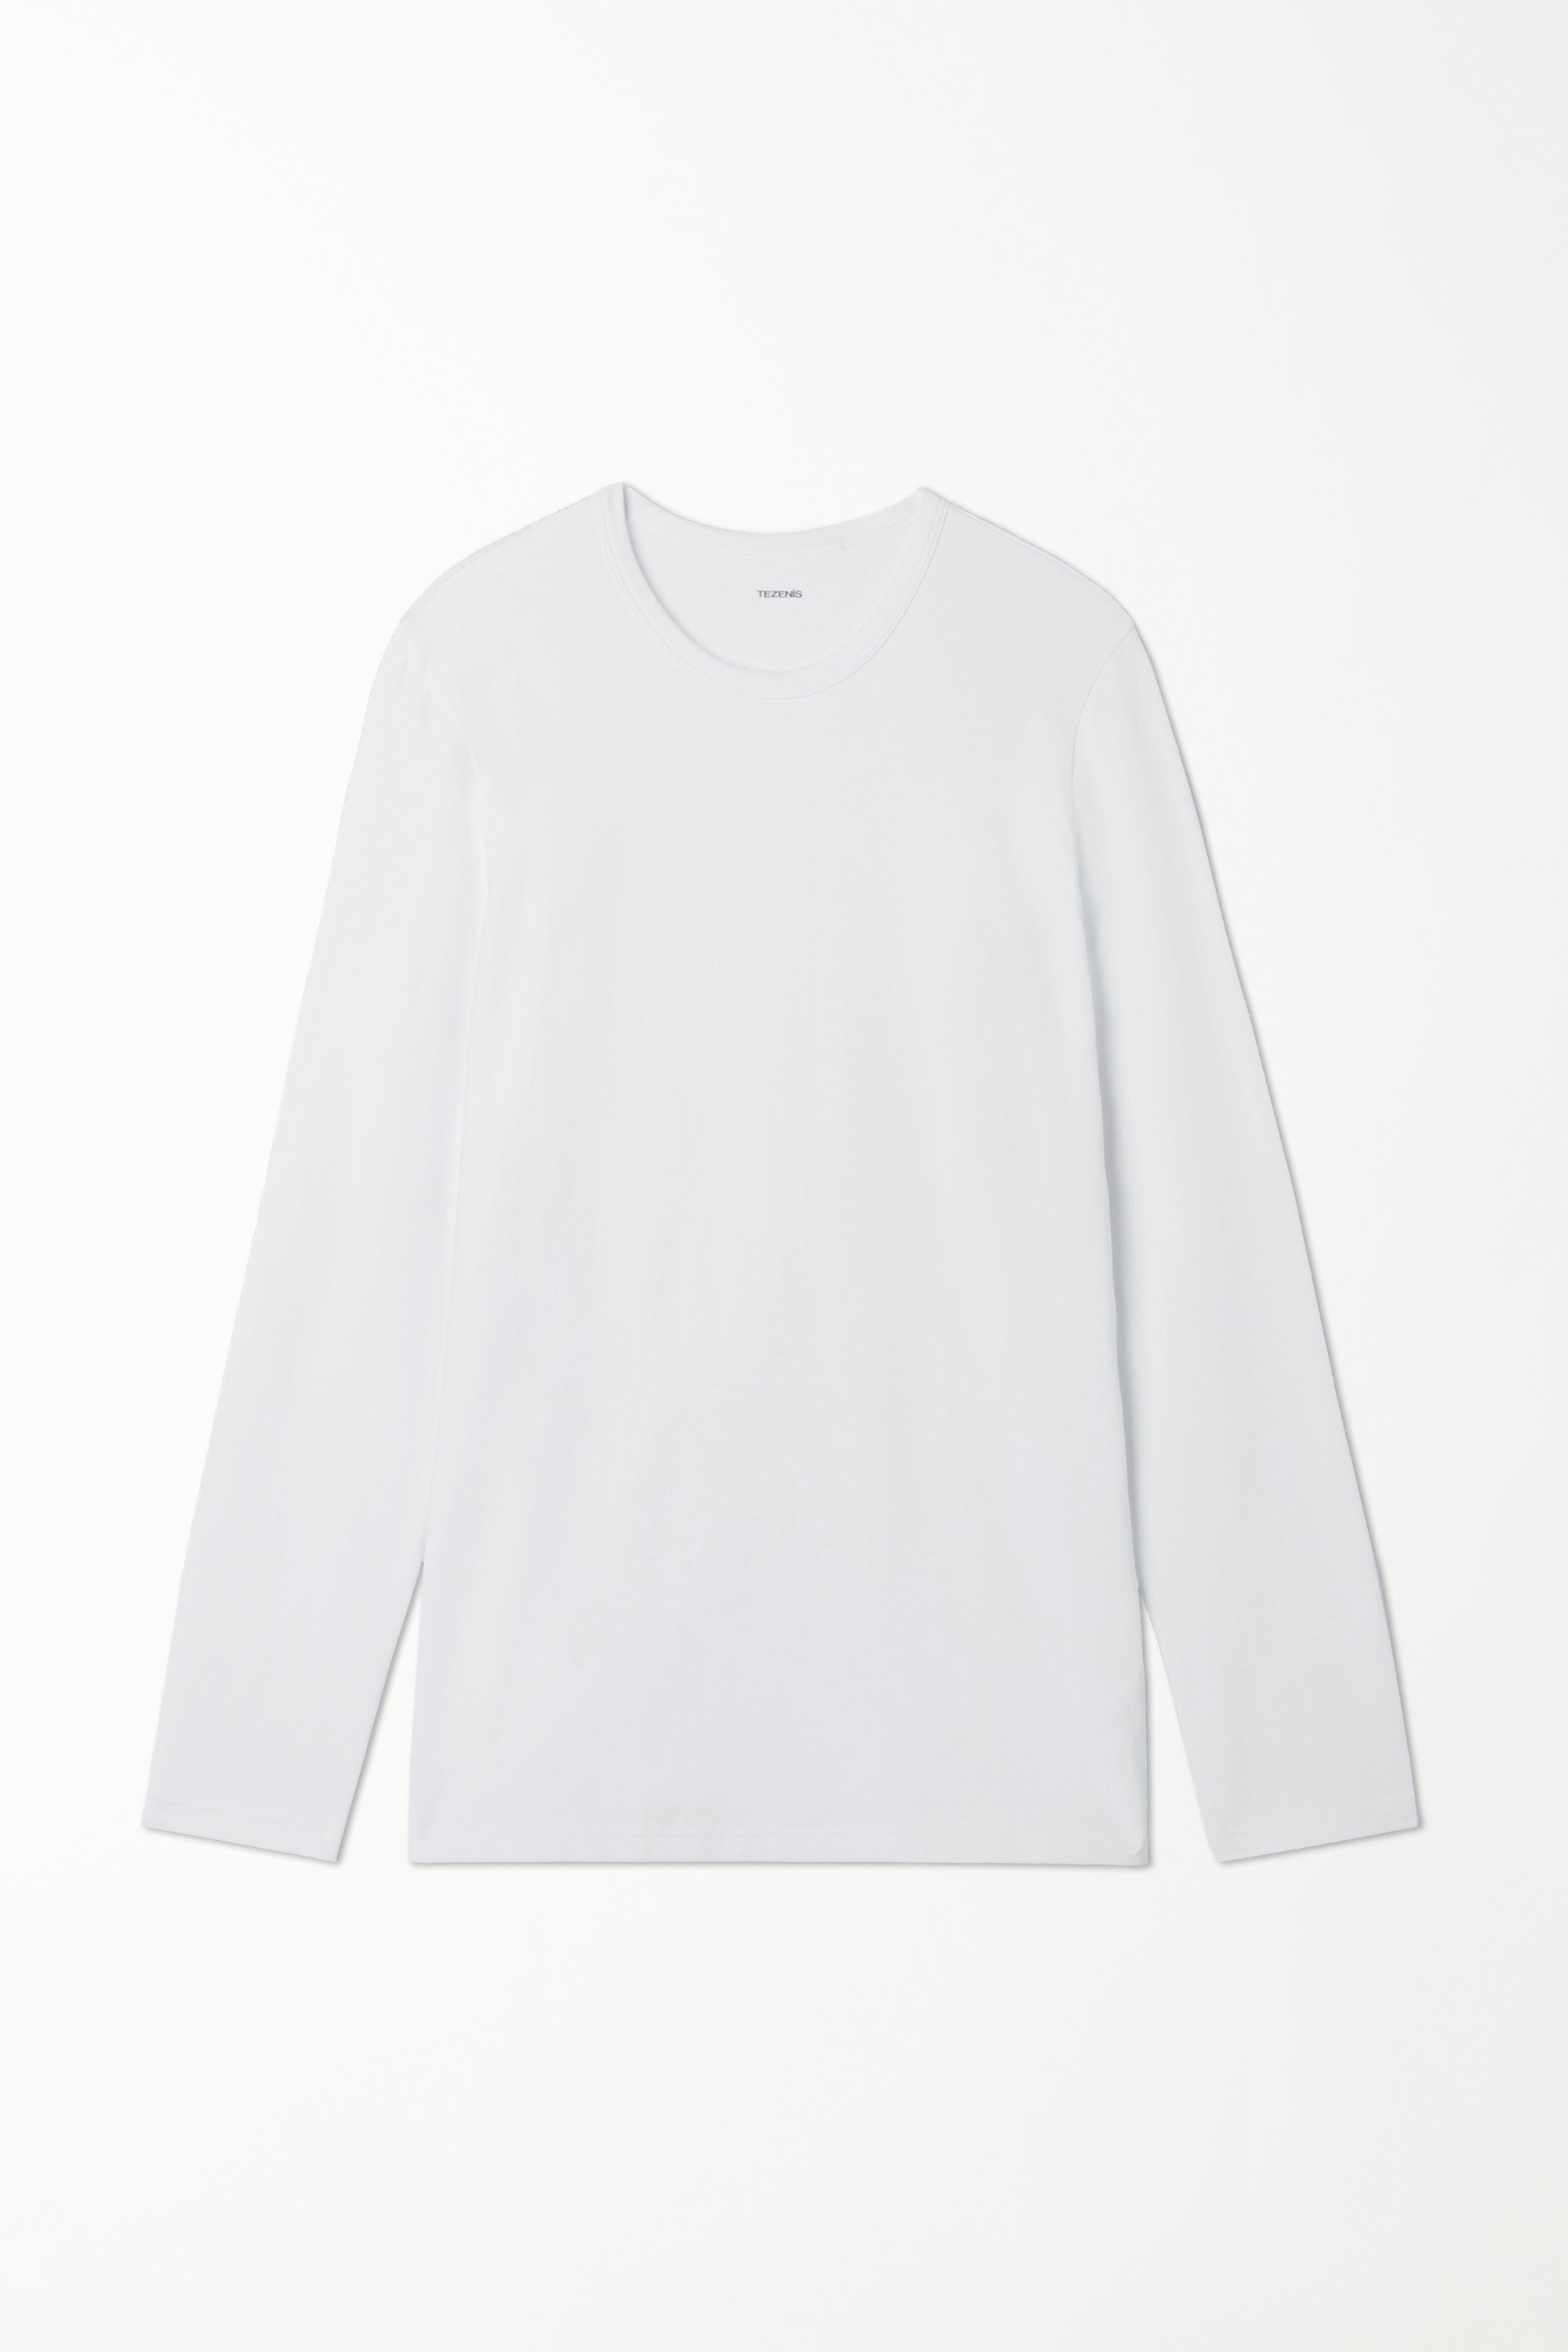 Long-Sleeve Round-Neck Thermal Cotton Top